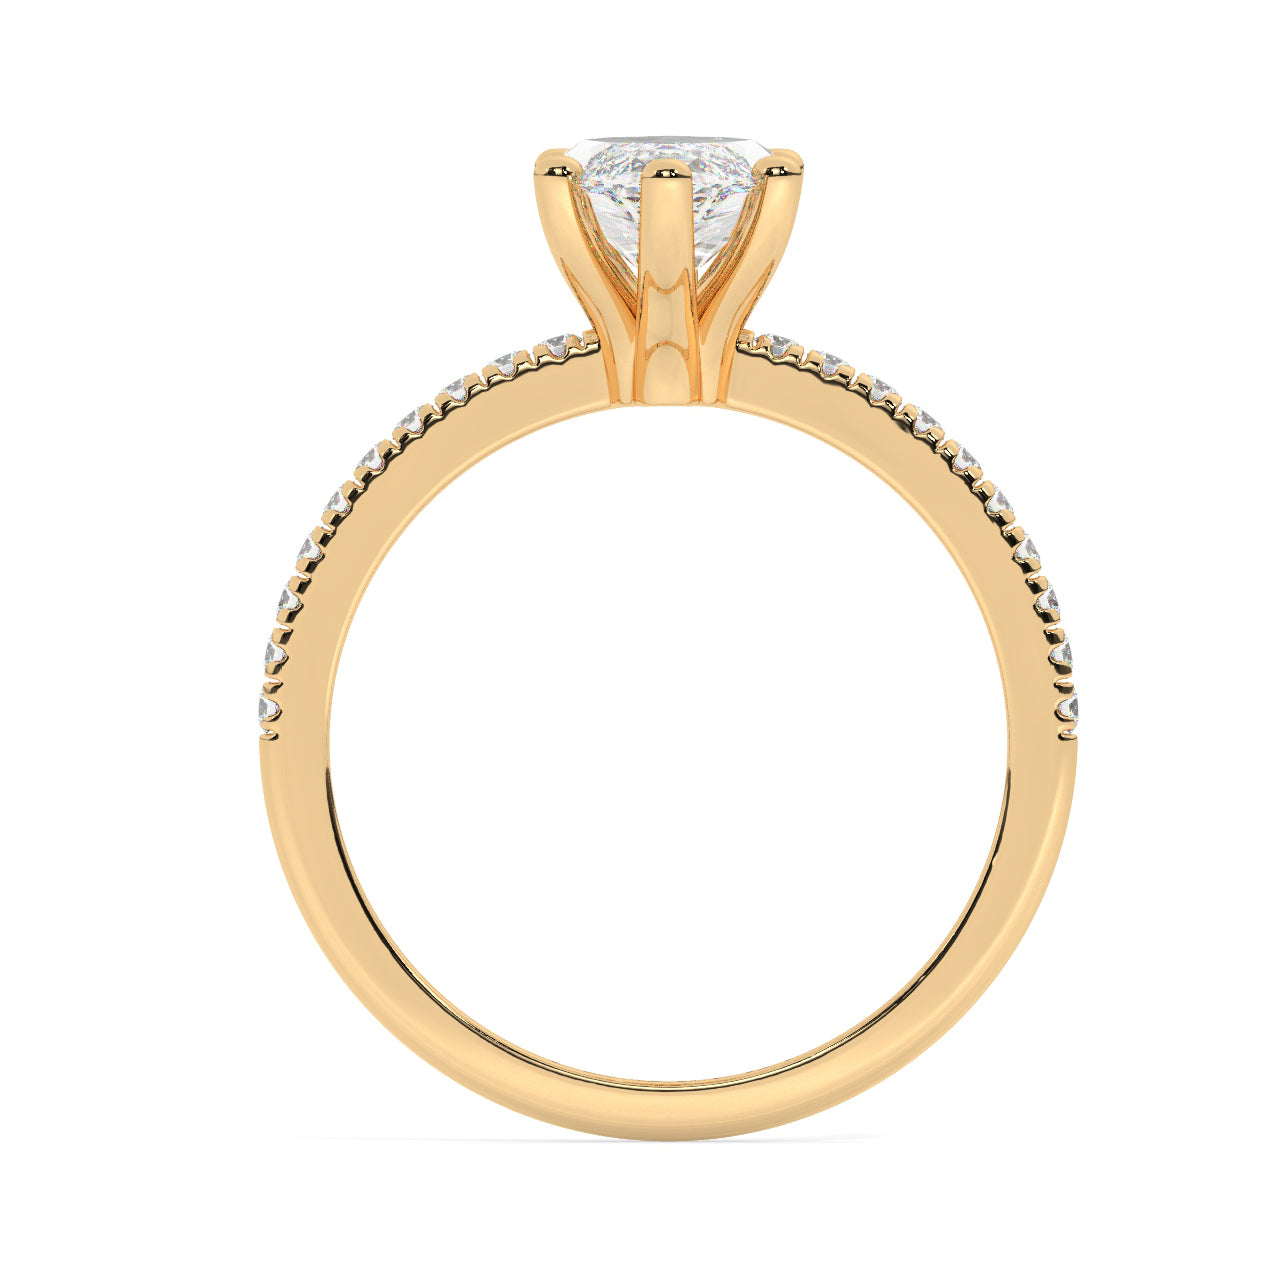 Marquise Cut Diamond Ring set on a Pavé Band in Yellow Gold - Side View